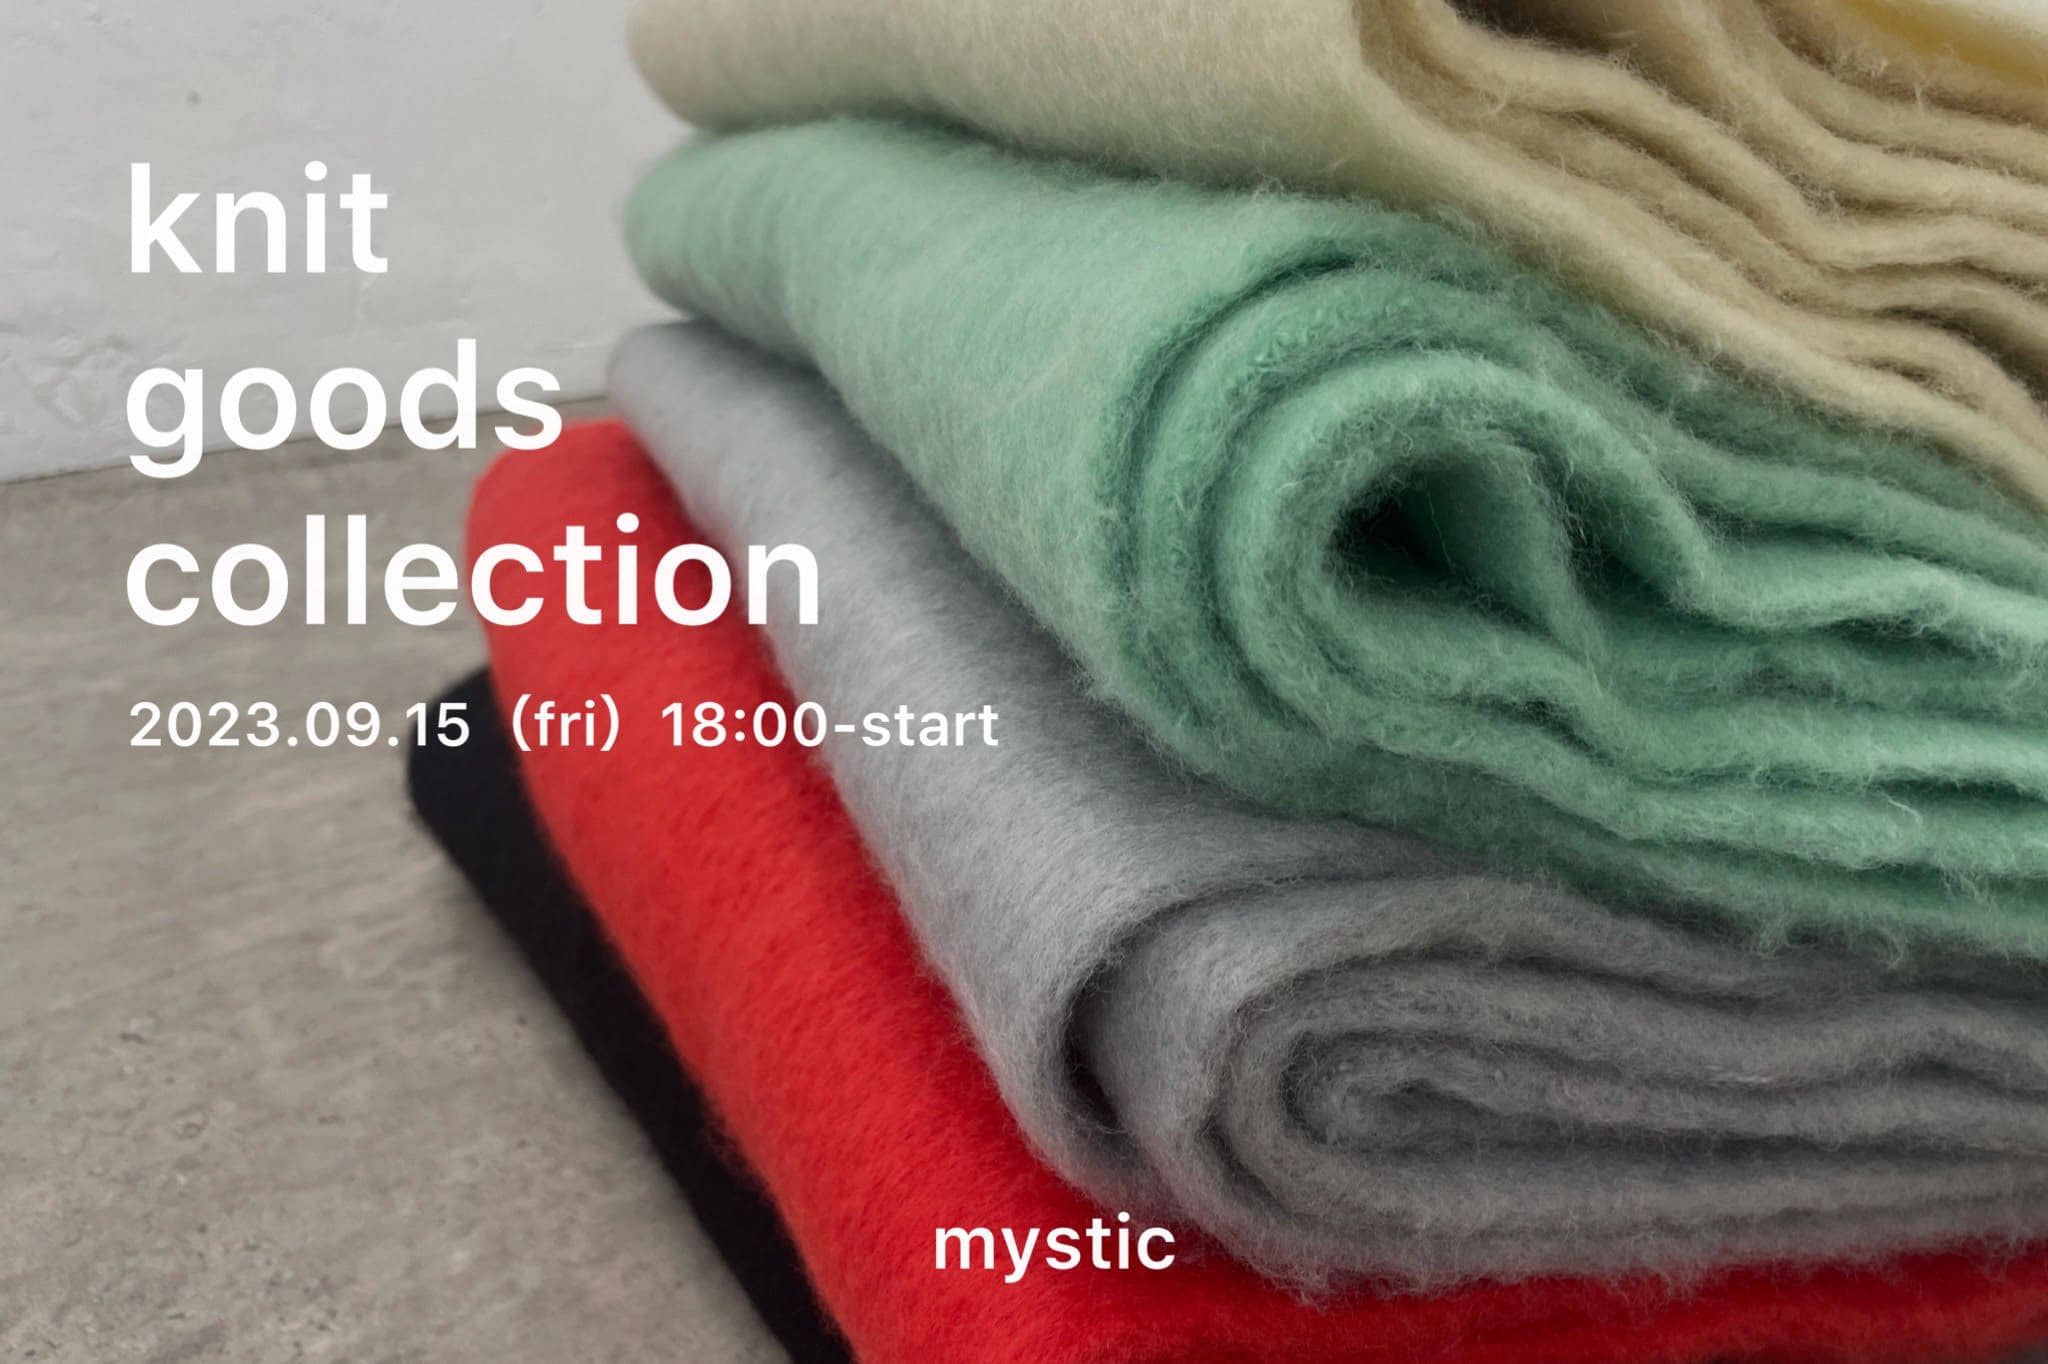 mystic kint goods collection